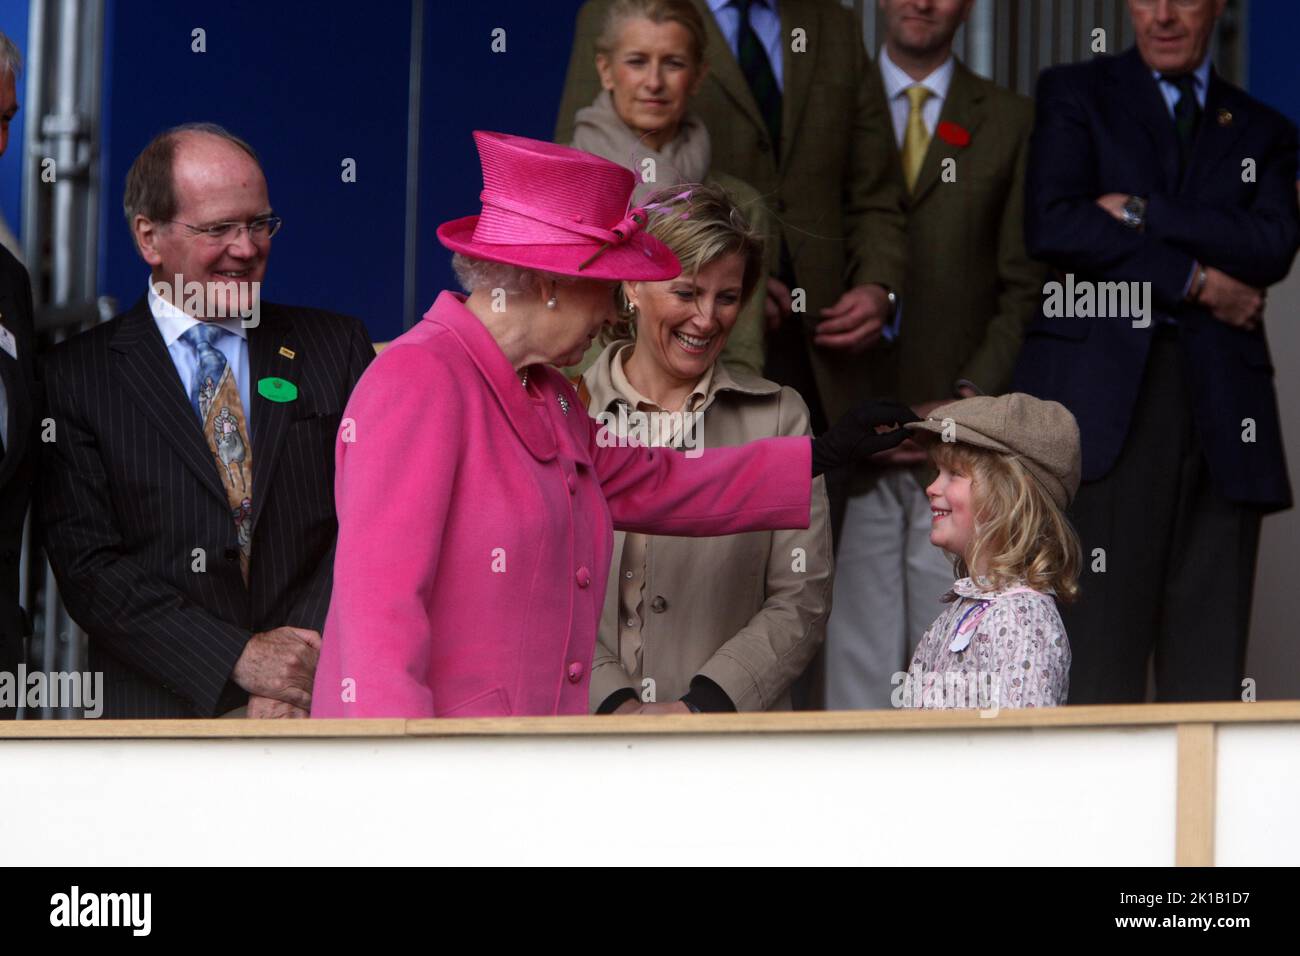 File photo dated 14/05/11 of Queen Elizabeth II with her daughter-in-law the Countess of Wessex (centre) and granddaughter Lady Louise Windsor at the Royal Windsor Horse show. The late monarch had eight grandchildren, who are performing a vigil around her coffin on Saturday, and 12 great-grandchildren. The Queen was grandmother to eight grandchildren, who all held a deep respect and admiration for their Granny. Peter Phillips, Zara Tindall, the Prince of Wales, the Duke of Sussex, Princess Beatrice, Princess Eugenie, Lady Louise Windsor and Viscount Severn will all honour the late monarch with Stock Photo